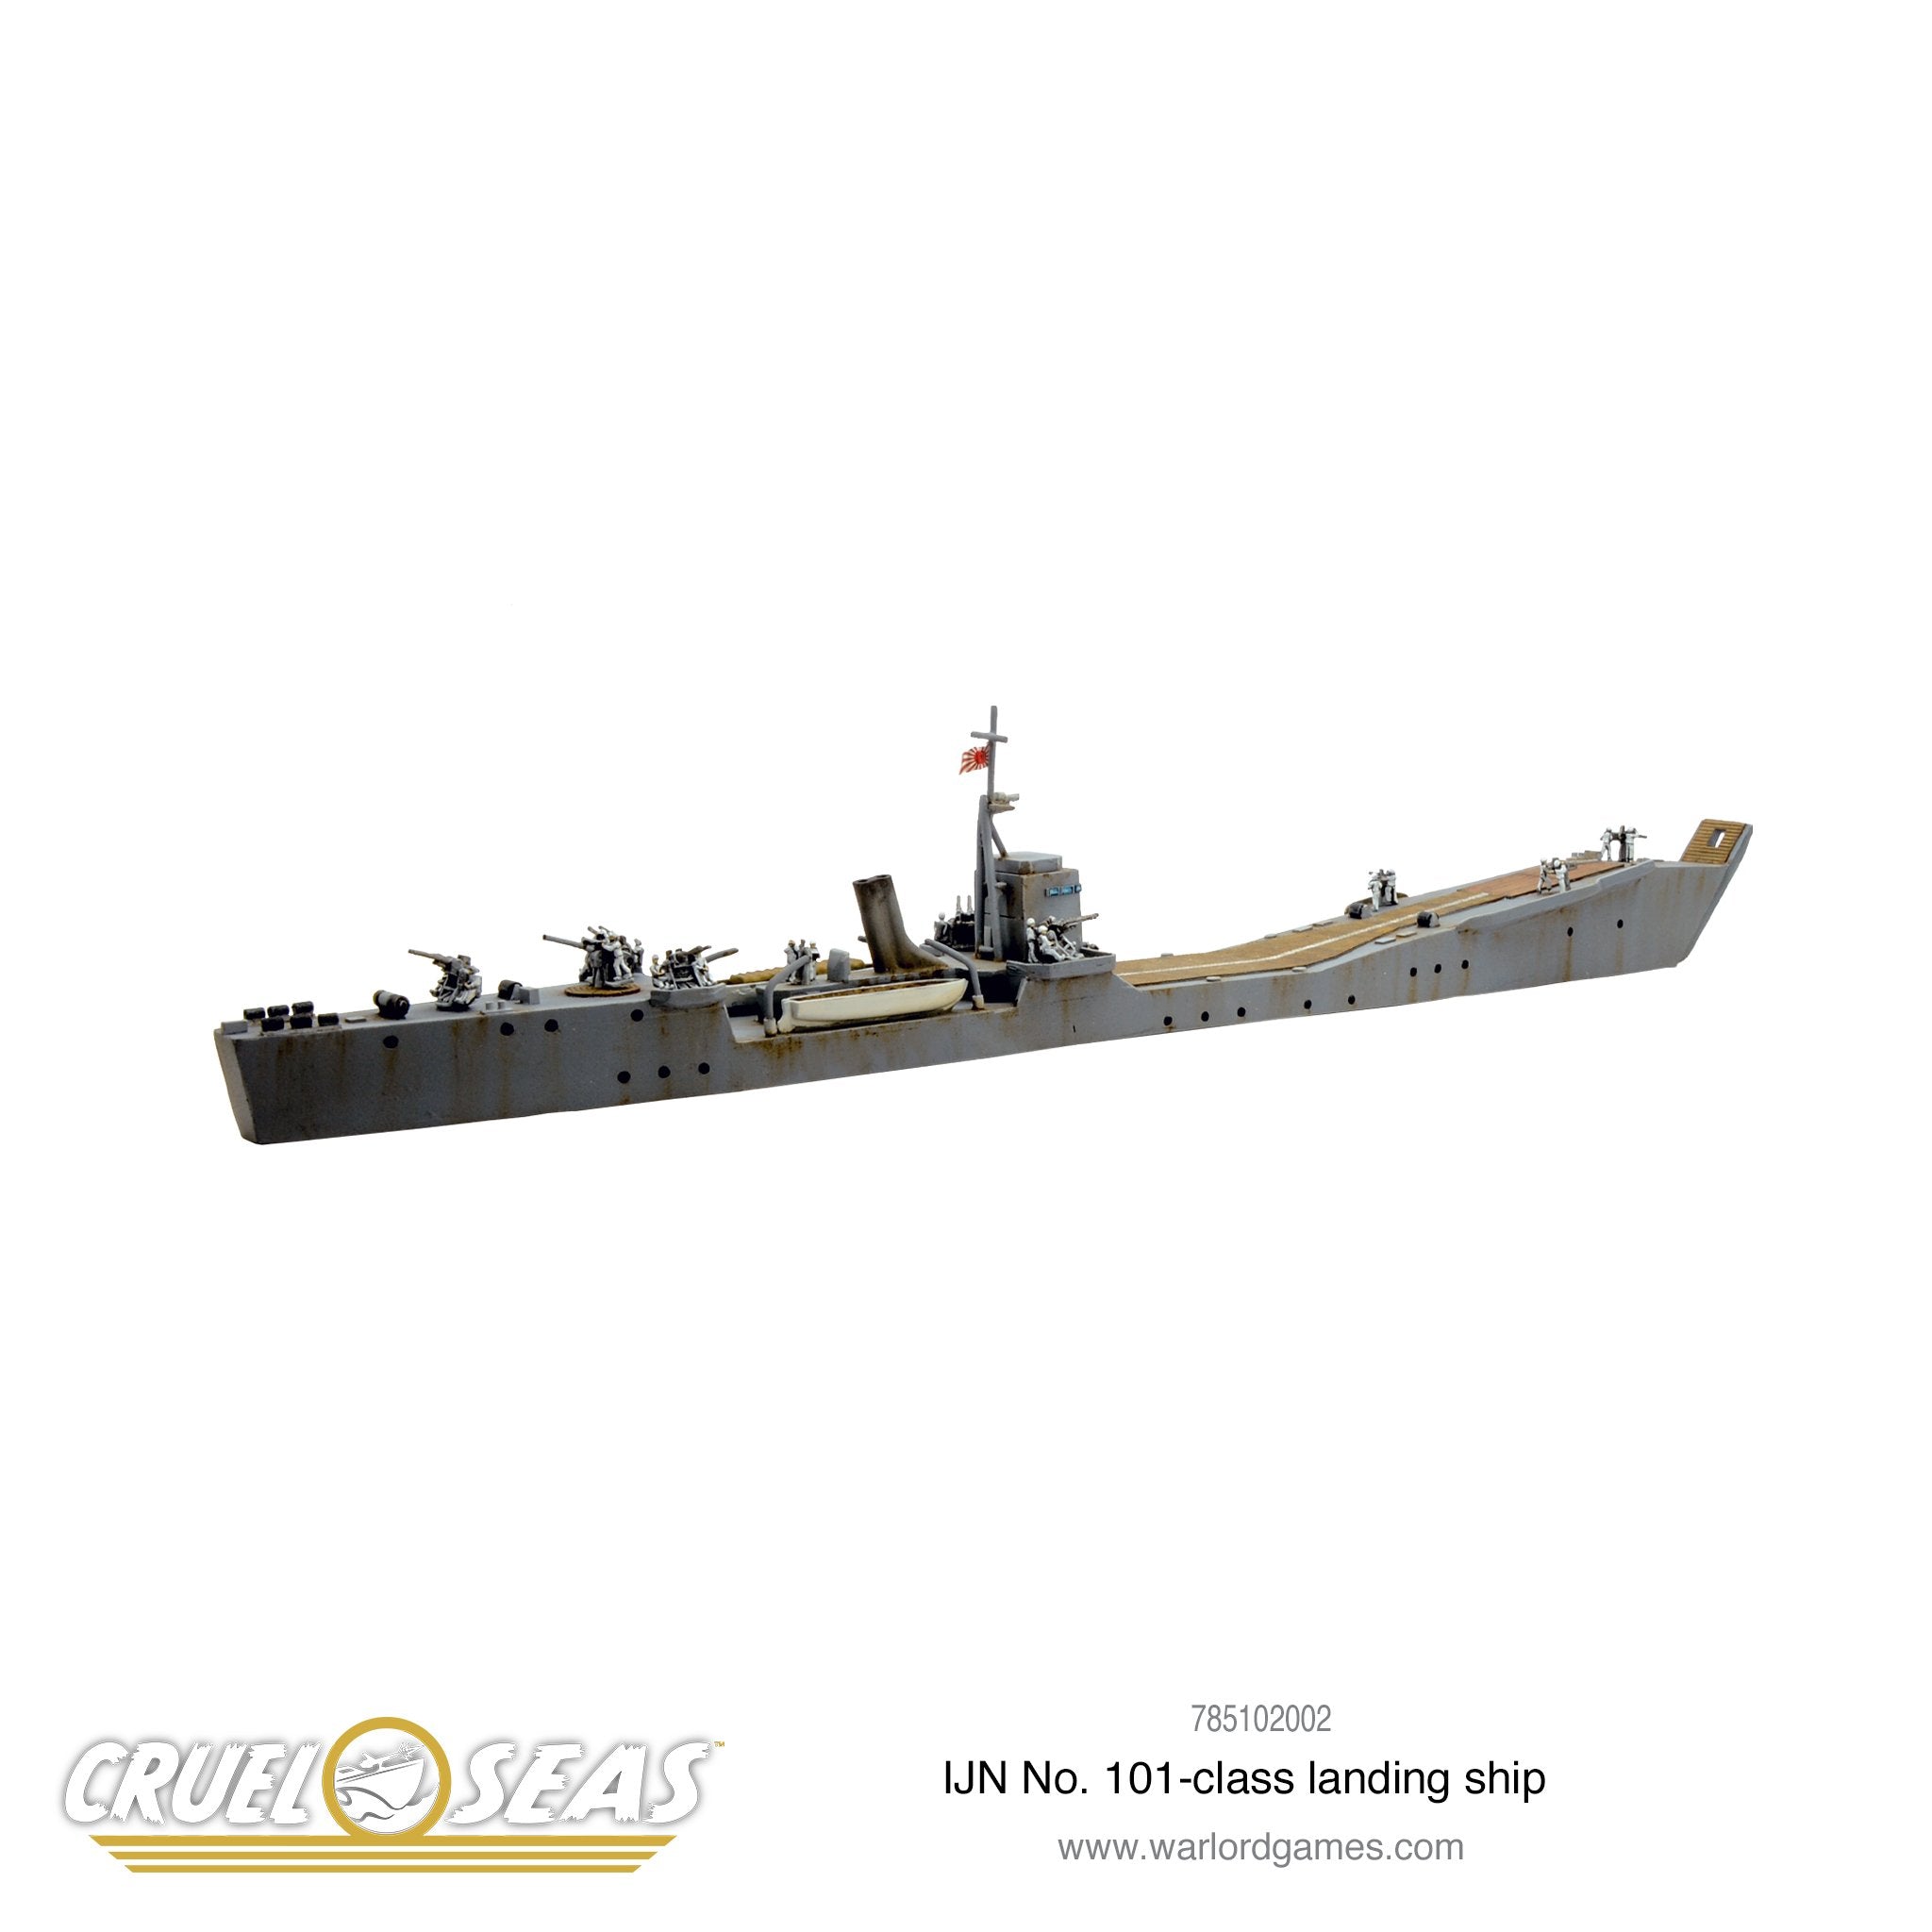 Imperial Japanese Navy No. 103-class landing ship